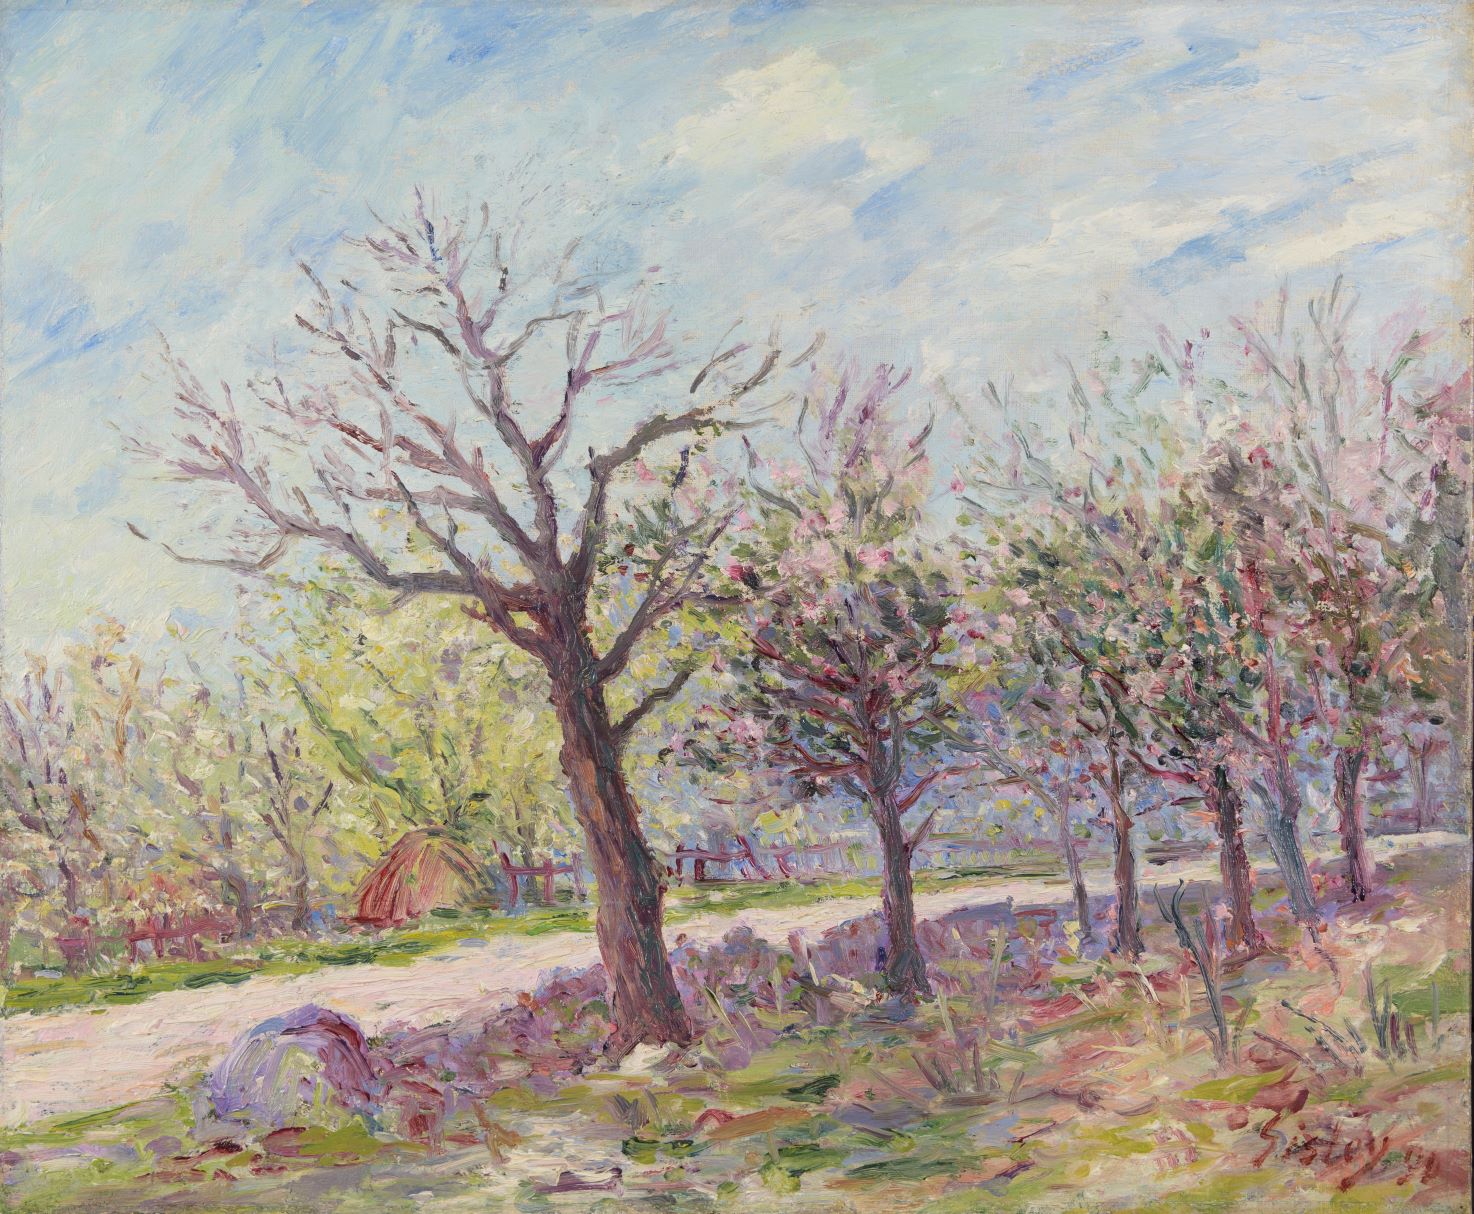 Alfred Sisley, Springtime in Moret-sur-Loing, 1890. Oil on canvas. SBMA, Bequest of Leslie L. Ridley-Tree